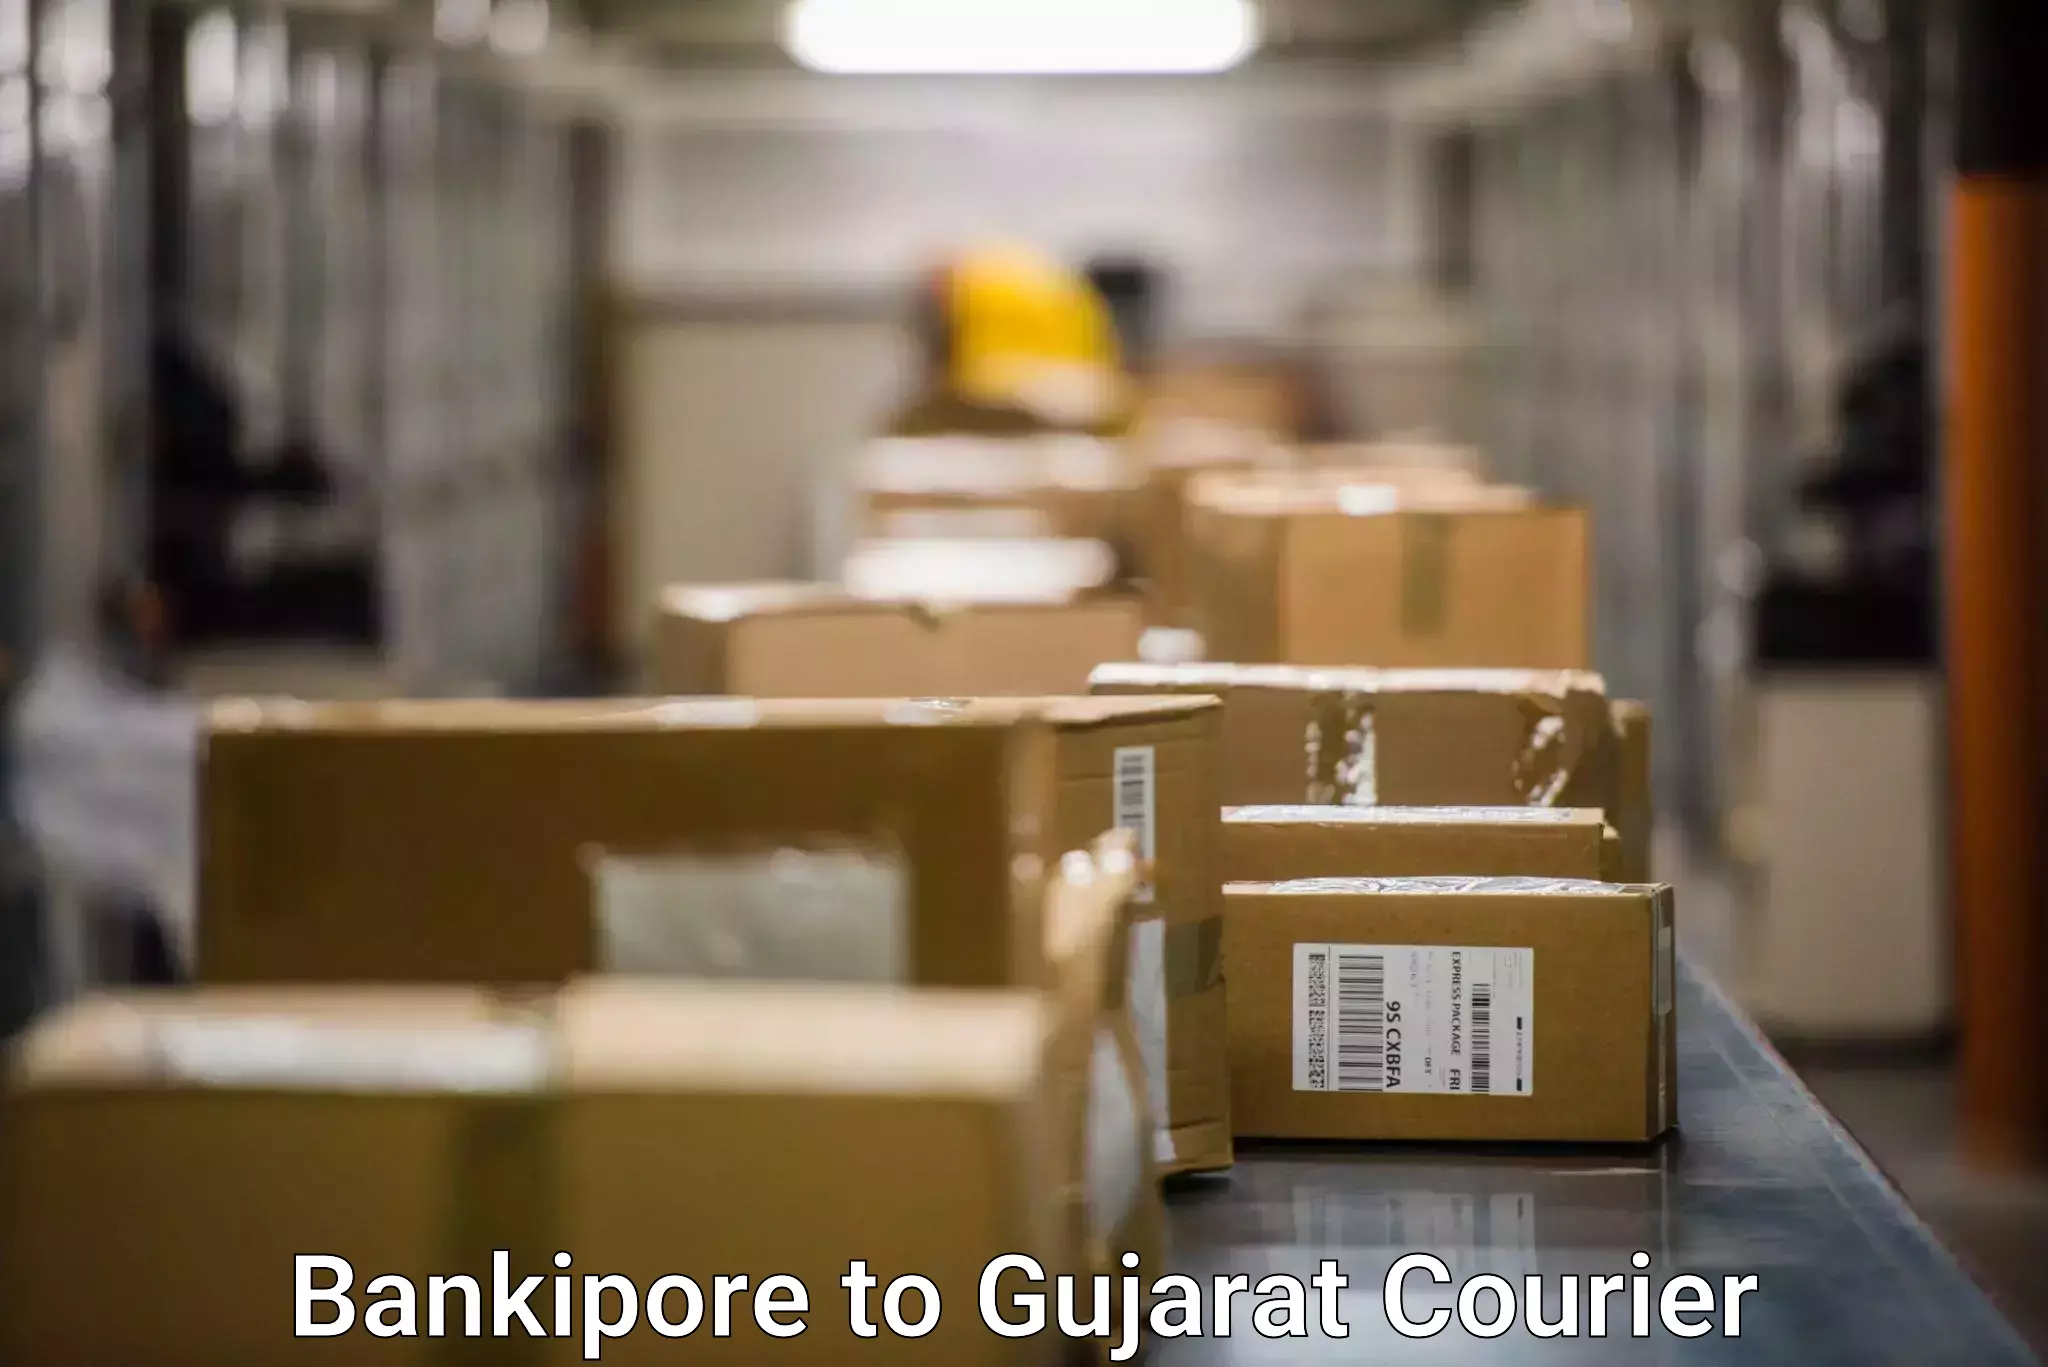 Overnight delivery services Bankipore to Dahod